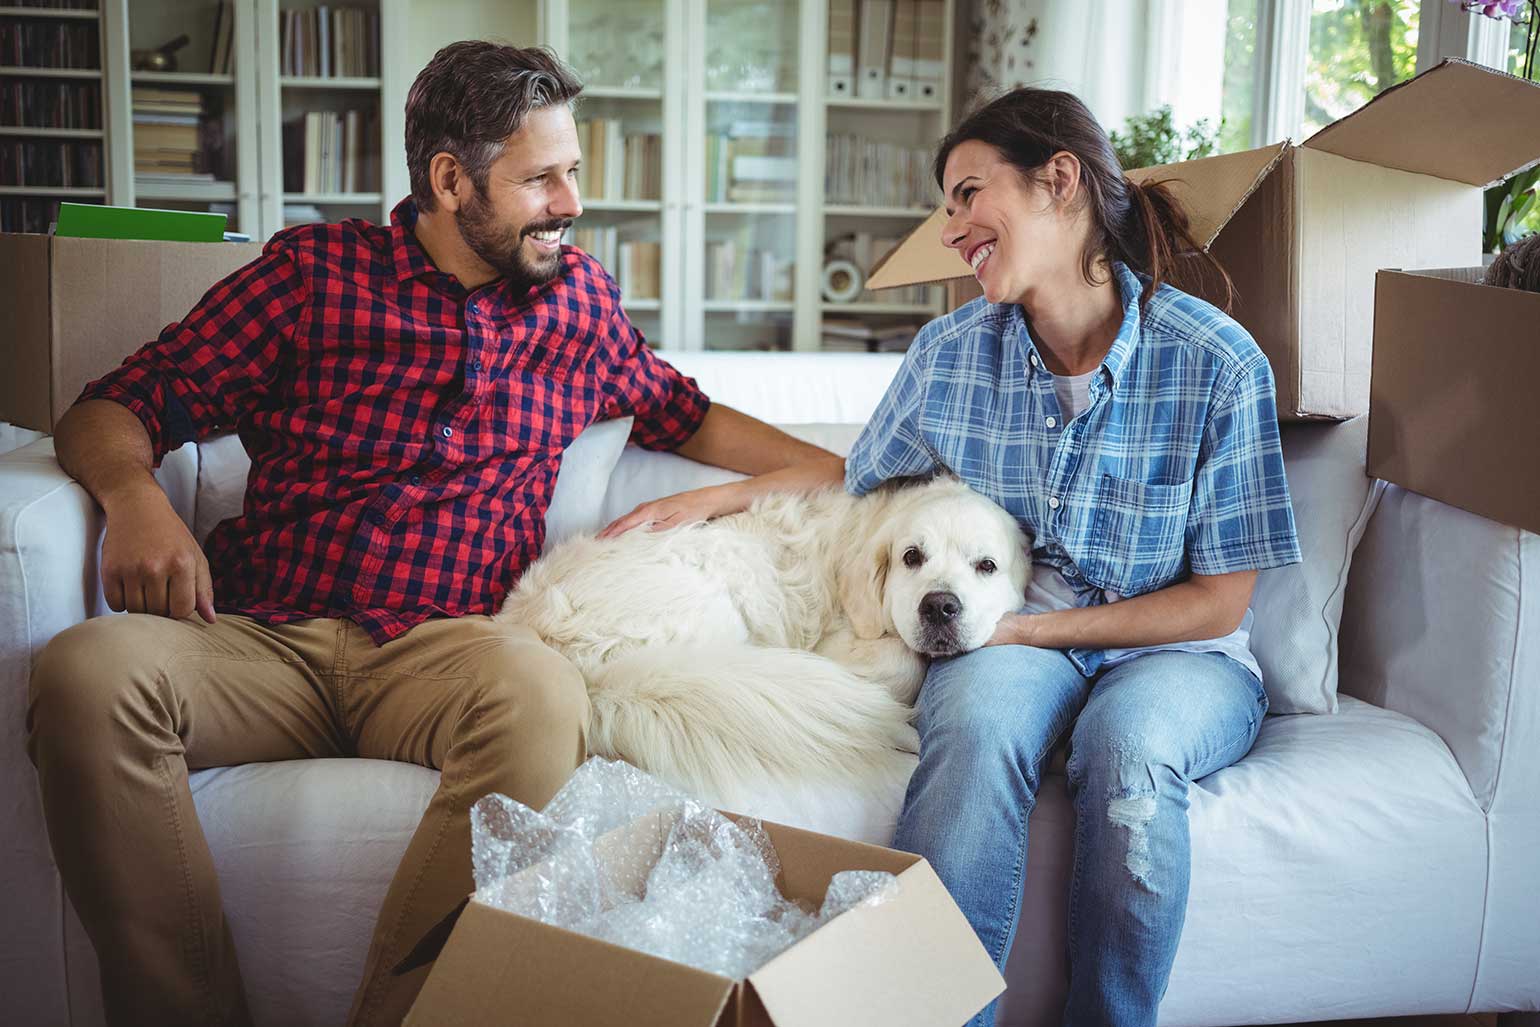 First time homebuyers happily unboxing pet's stuff